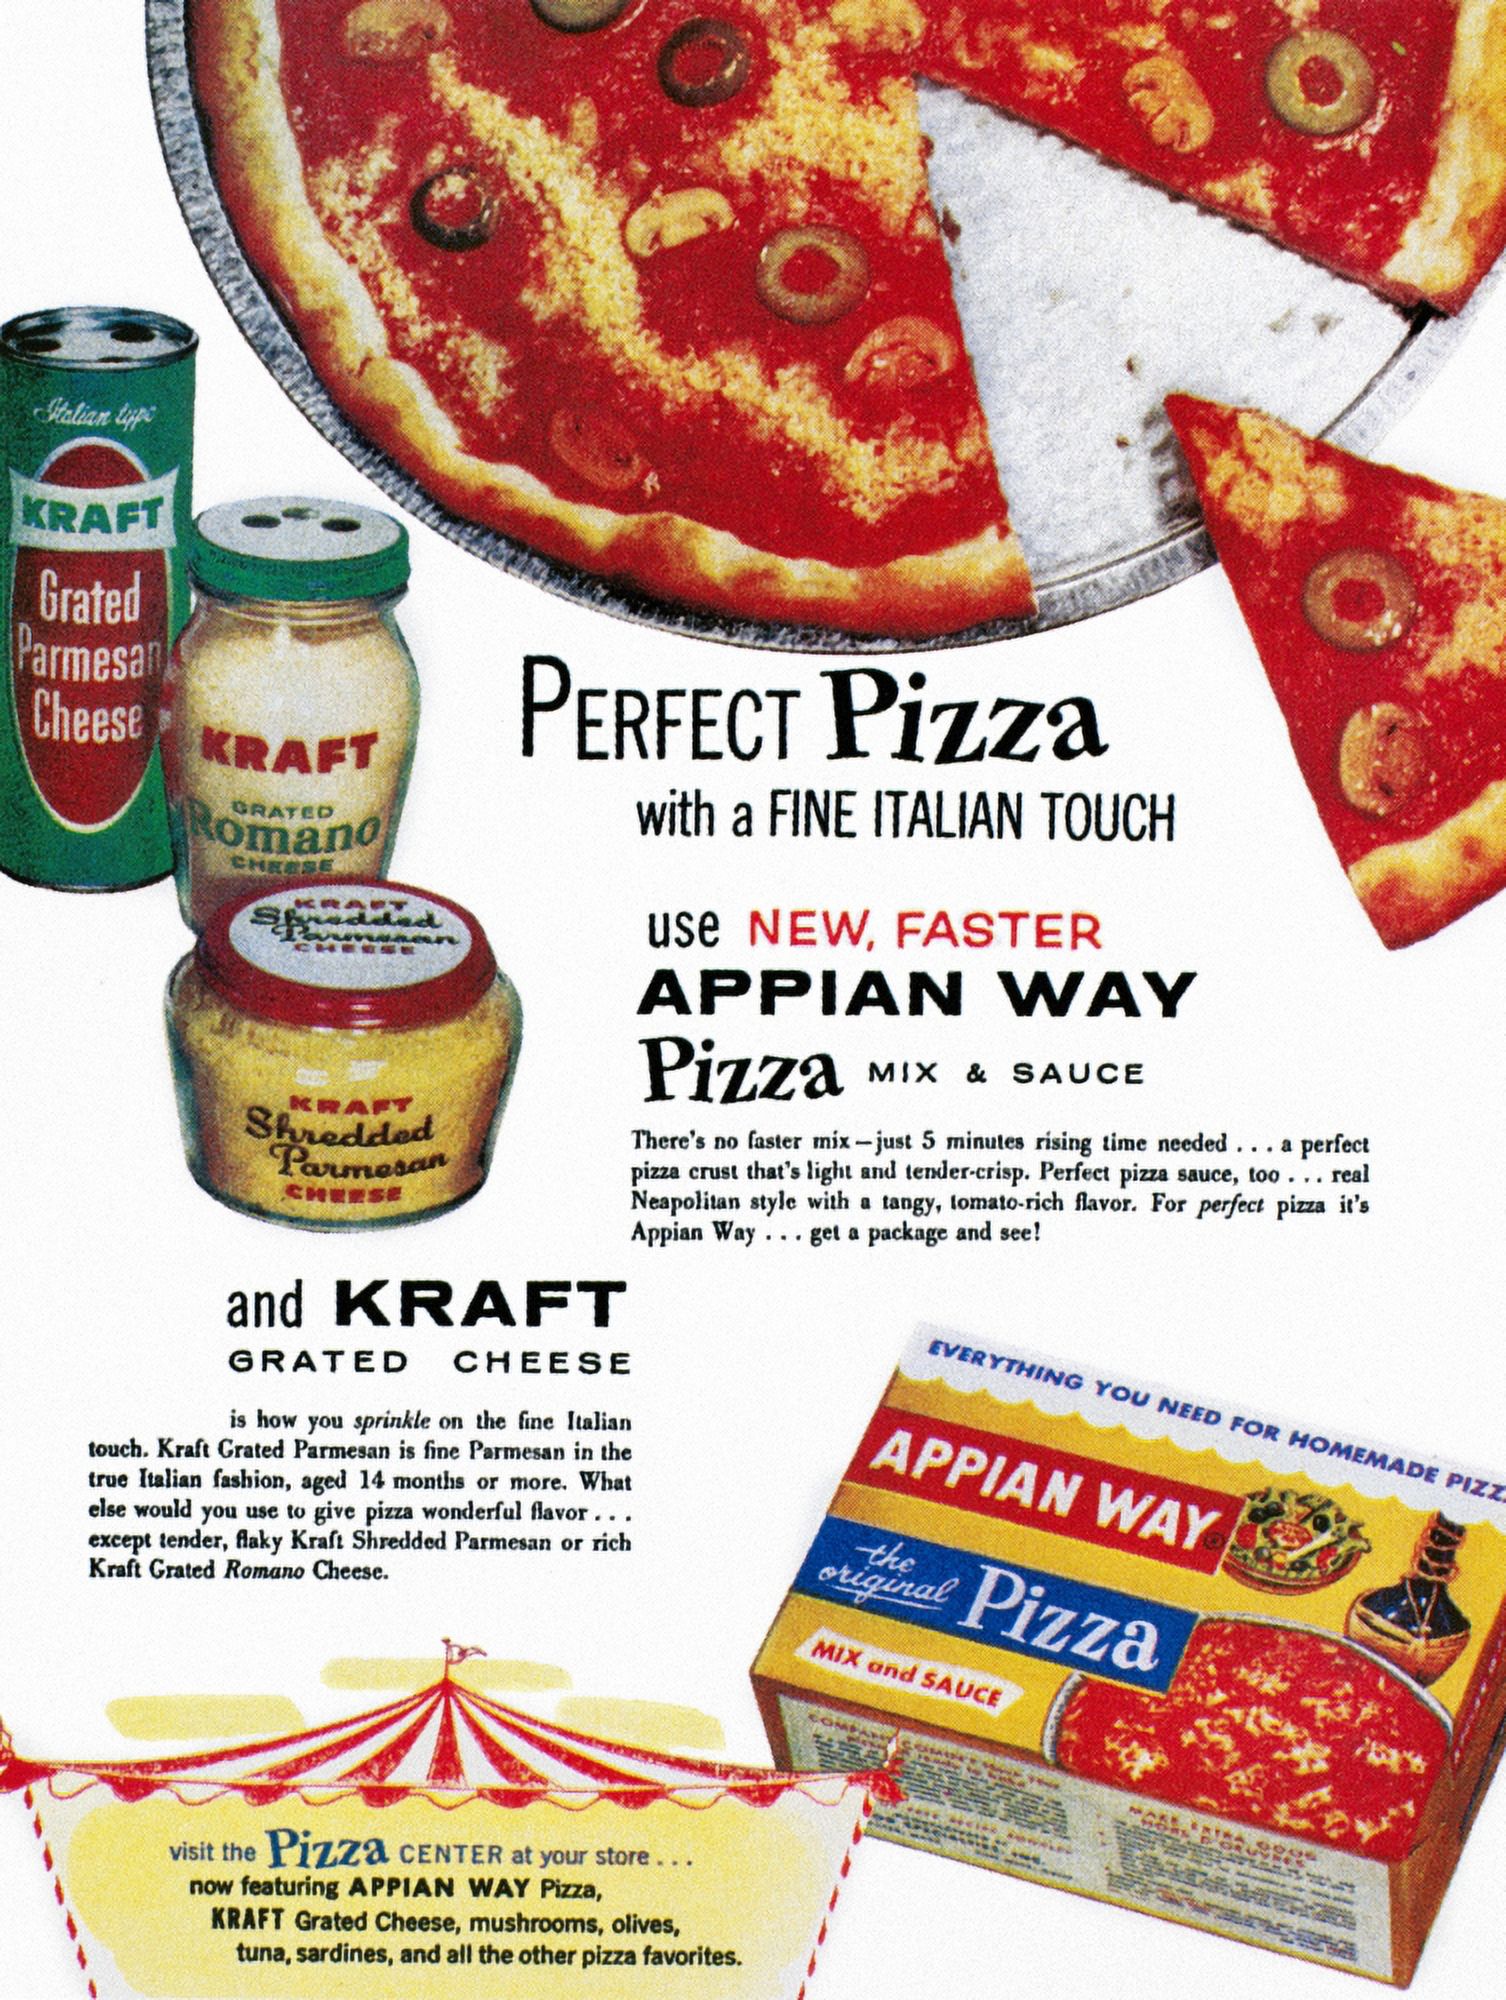 Pizza Mix Ad, 1960. /Nadvertisement For Kraft Grated Cheese And Appian Way Pizza Mix And Sauce, From An American Magazine, 1960. Poster Print by  (24 x 36) - image 1 of 1